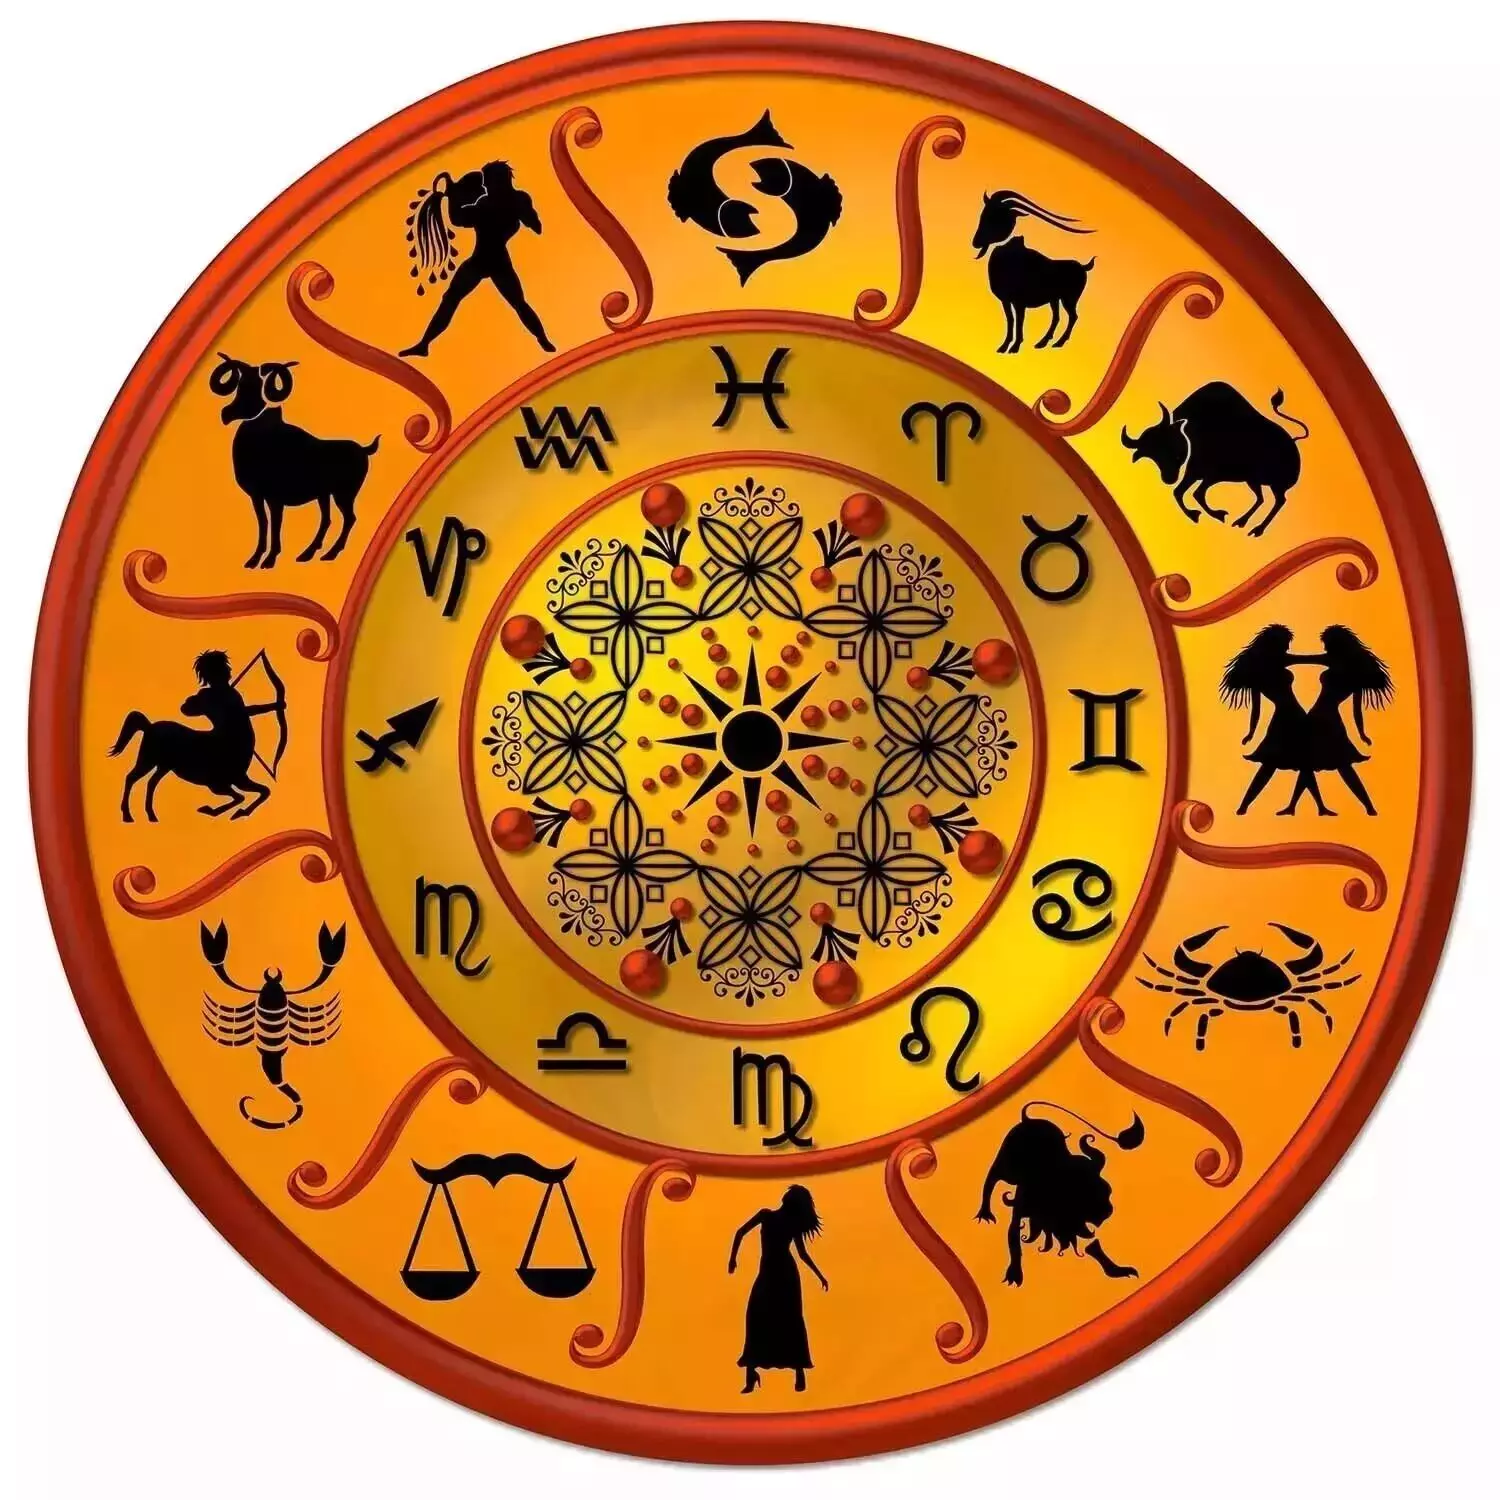 01 June  – Know your todays horoscope